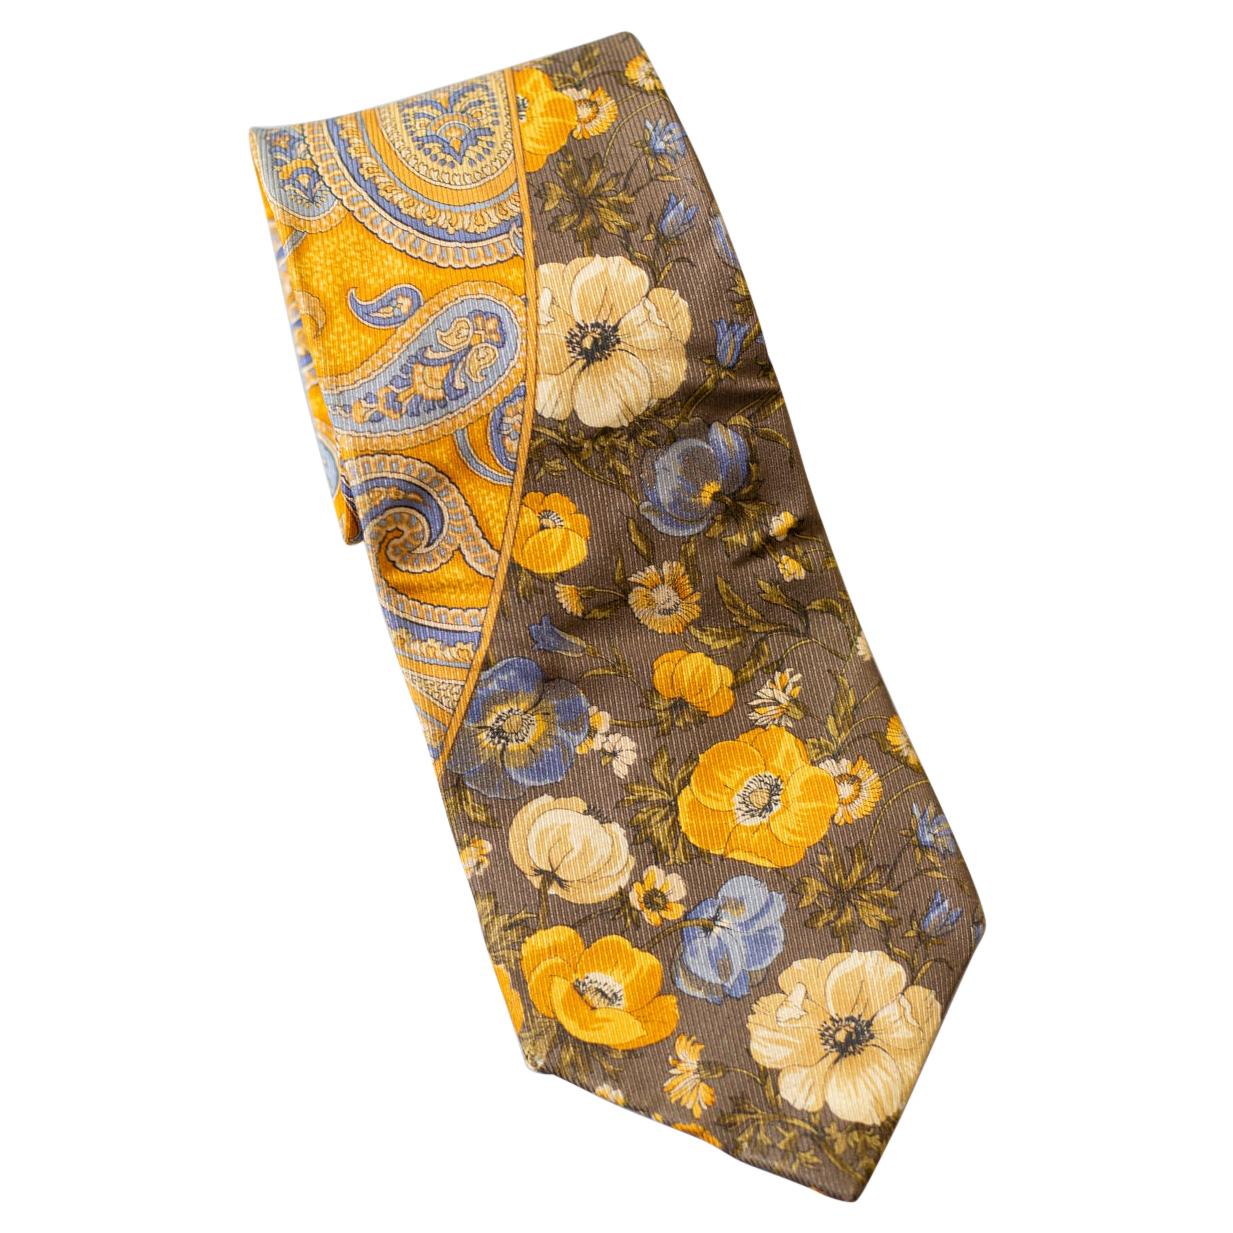 Vintage Kenzo all-silk yellow tie with flowers